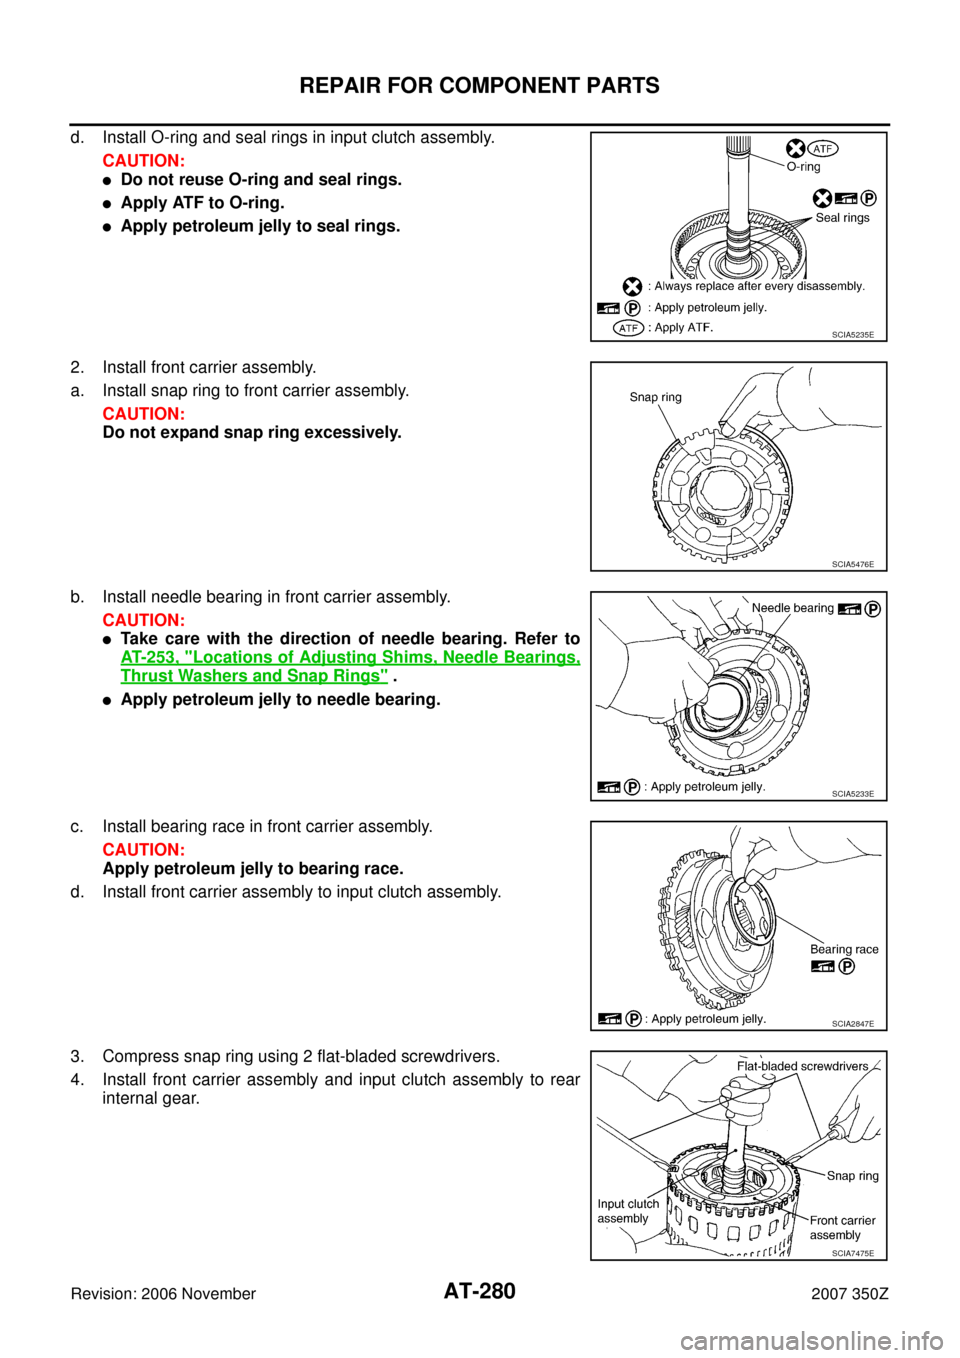 NISSAN 350Z 2007 Z33 Automatic Transmission Workshop Manual AT-280
REPAIR FOR COMPONENT PARTS
Revision: 2006 November2007 350Z
d. Install O-ring and seal rings in input clutch assembly.
CAUTION:
Do not reuse O-ring and seal rings.
Apply ATF to O-ring.
Apply